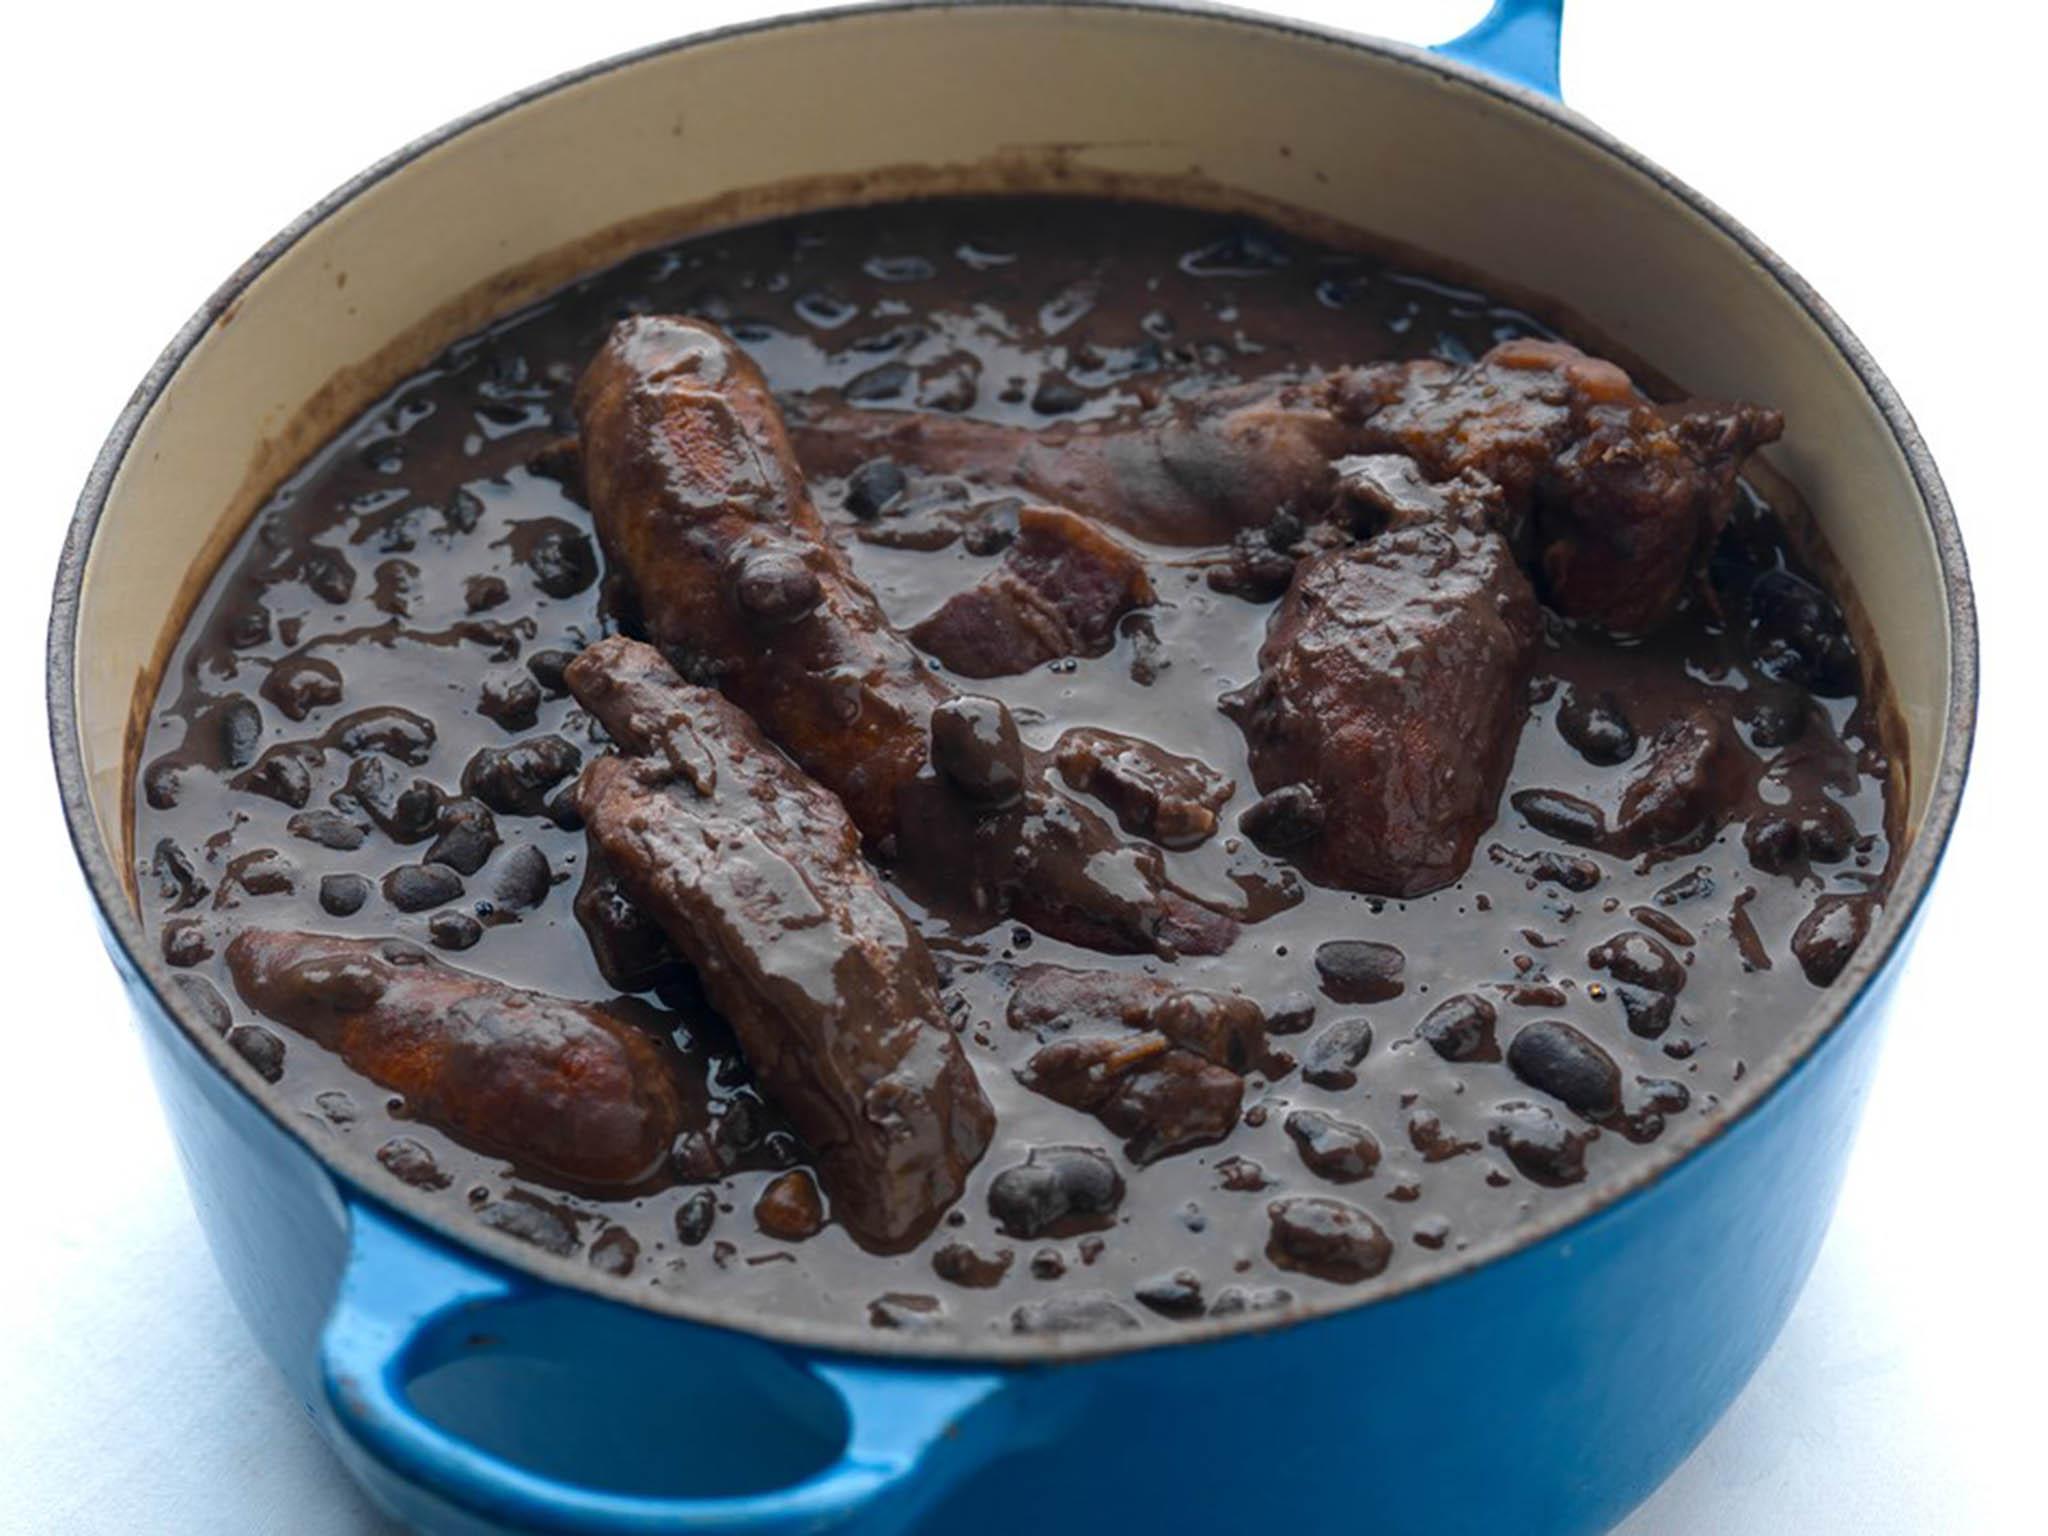 As the bread and butter of Brazil, feijoada is the national dish